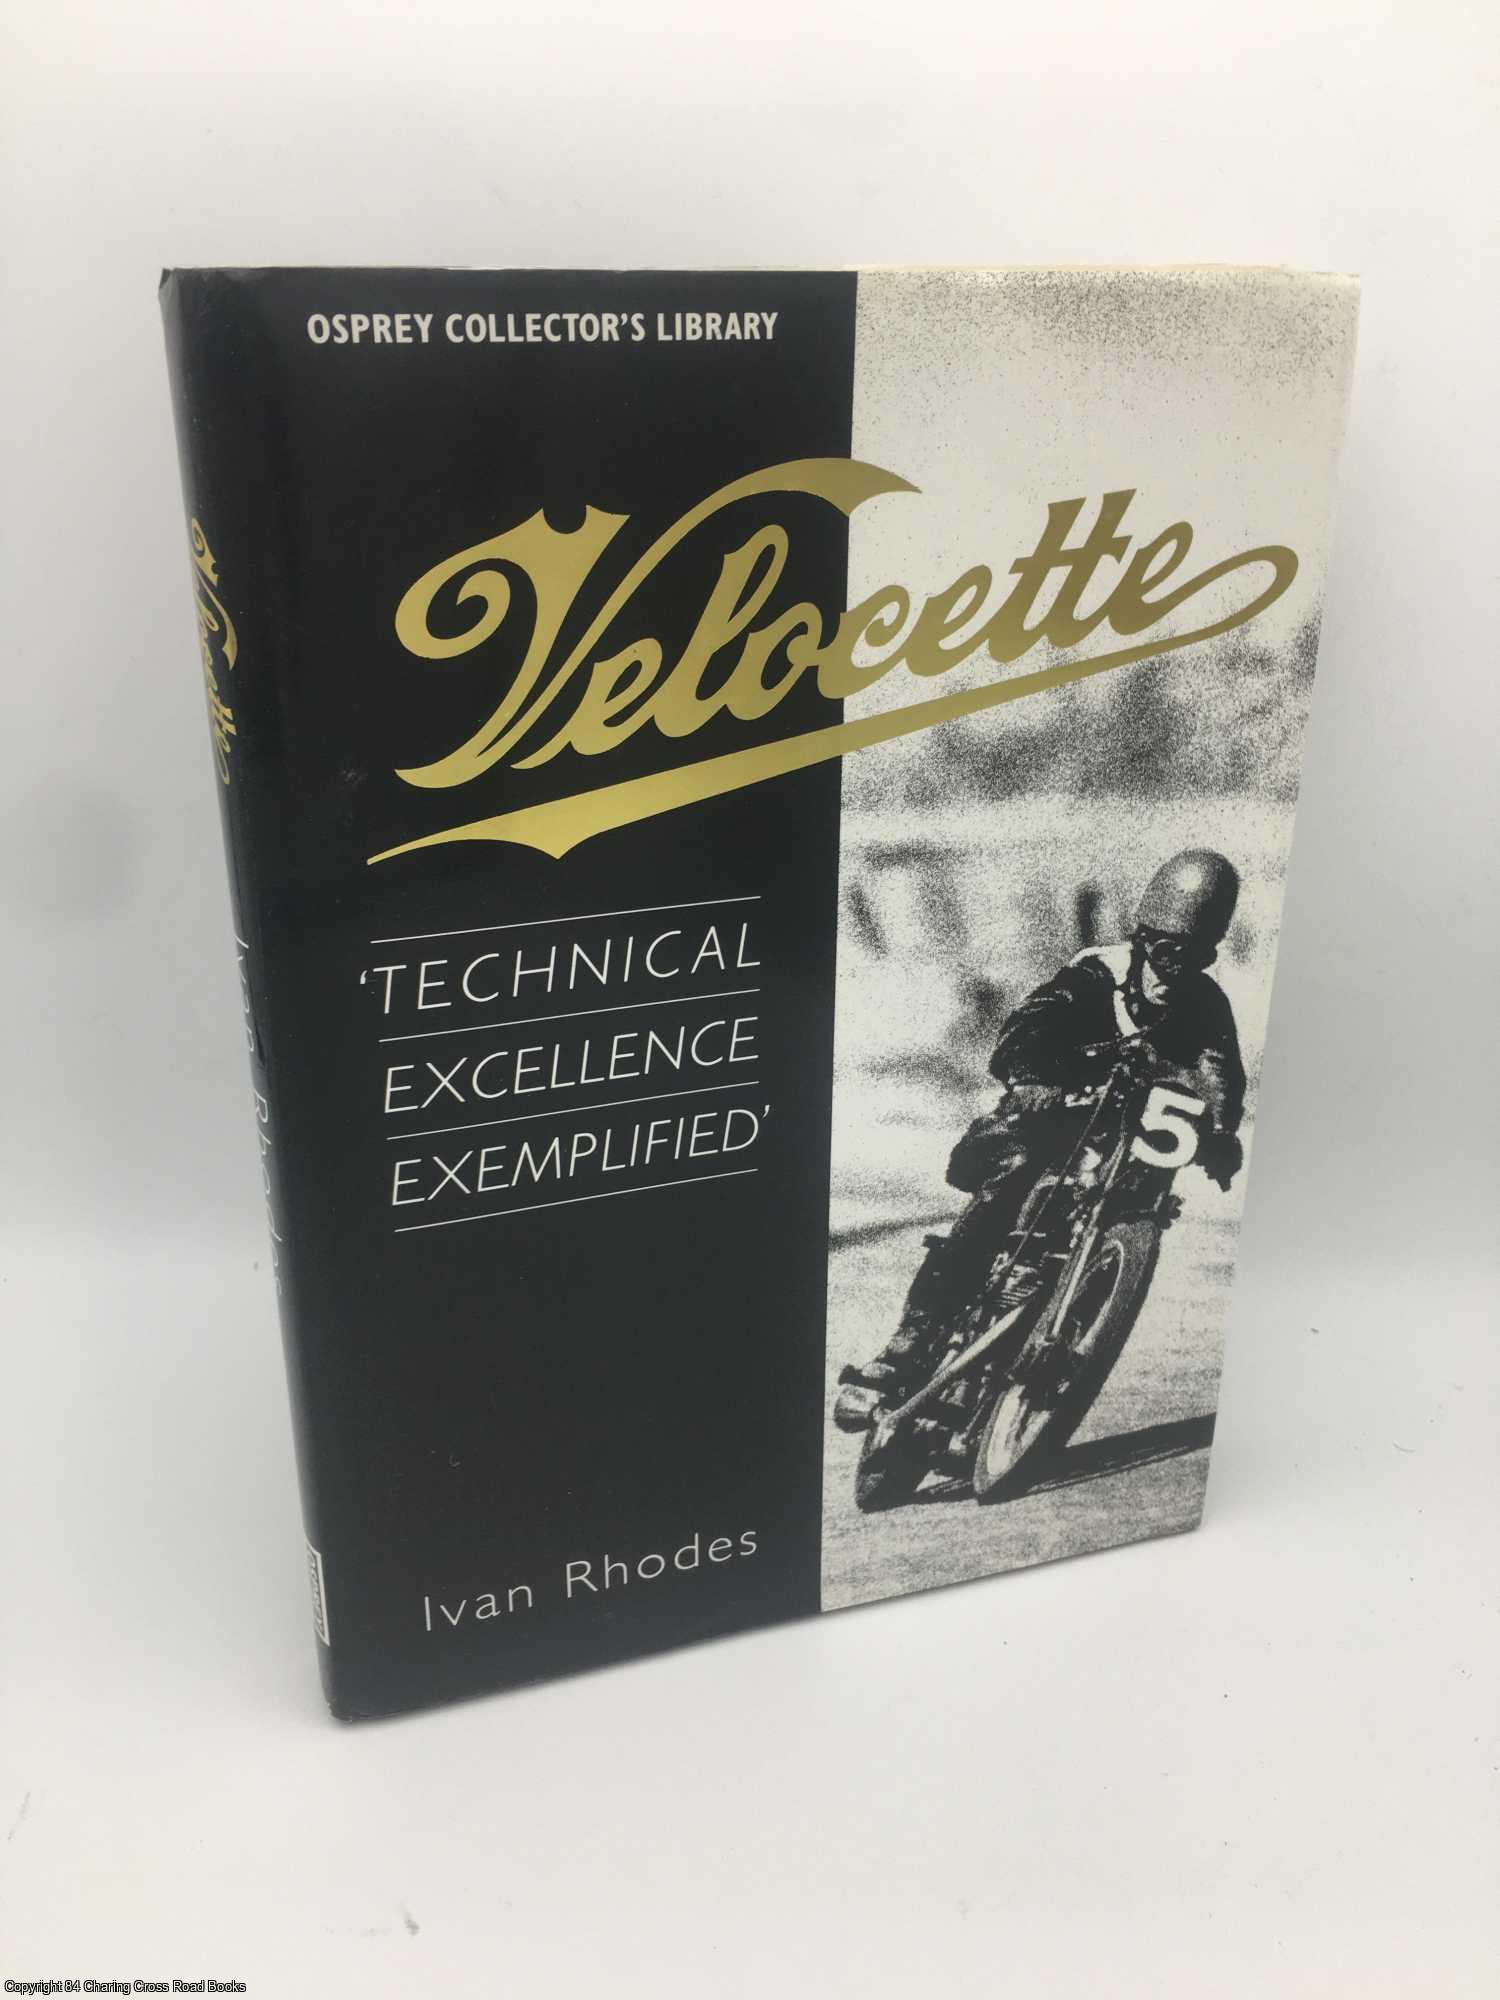 Rhodes, Ivan - Velocette: Technical Excellence Exemplified